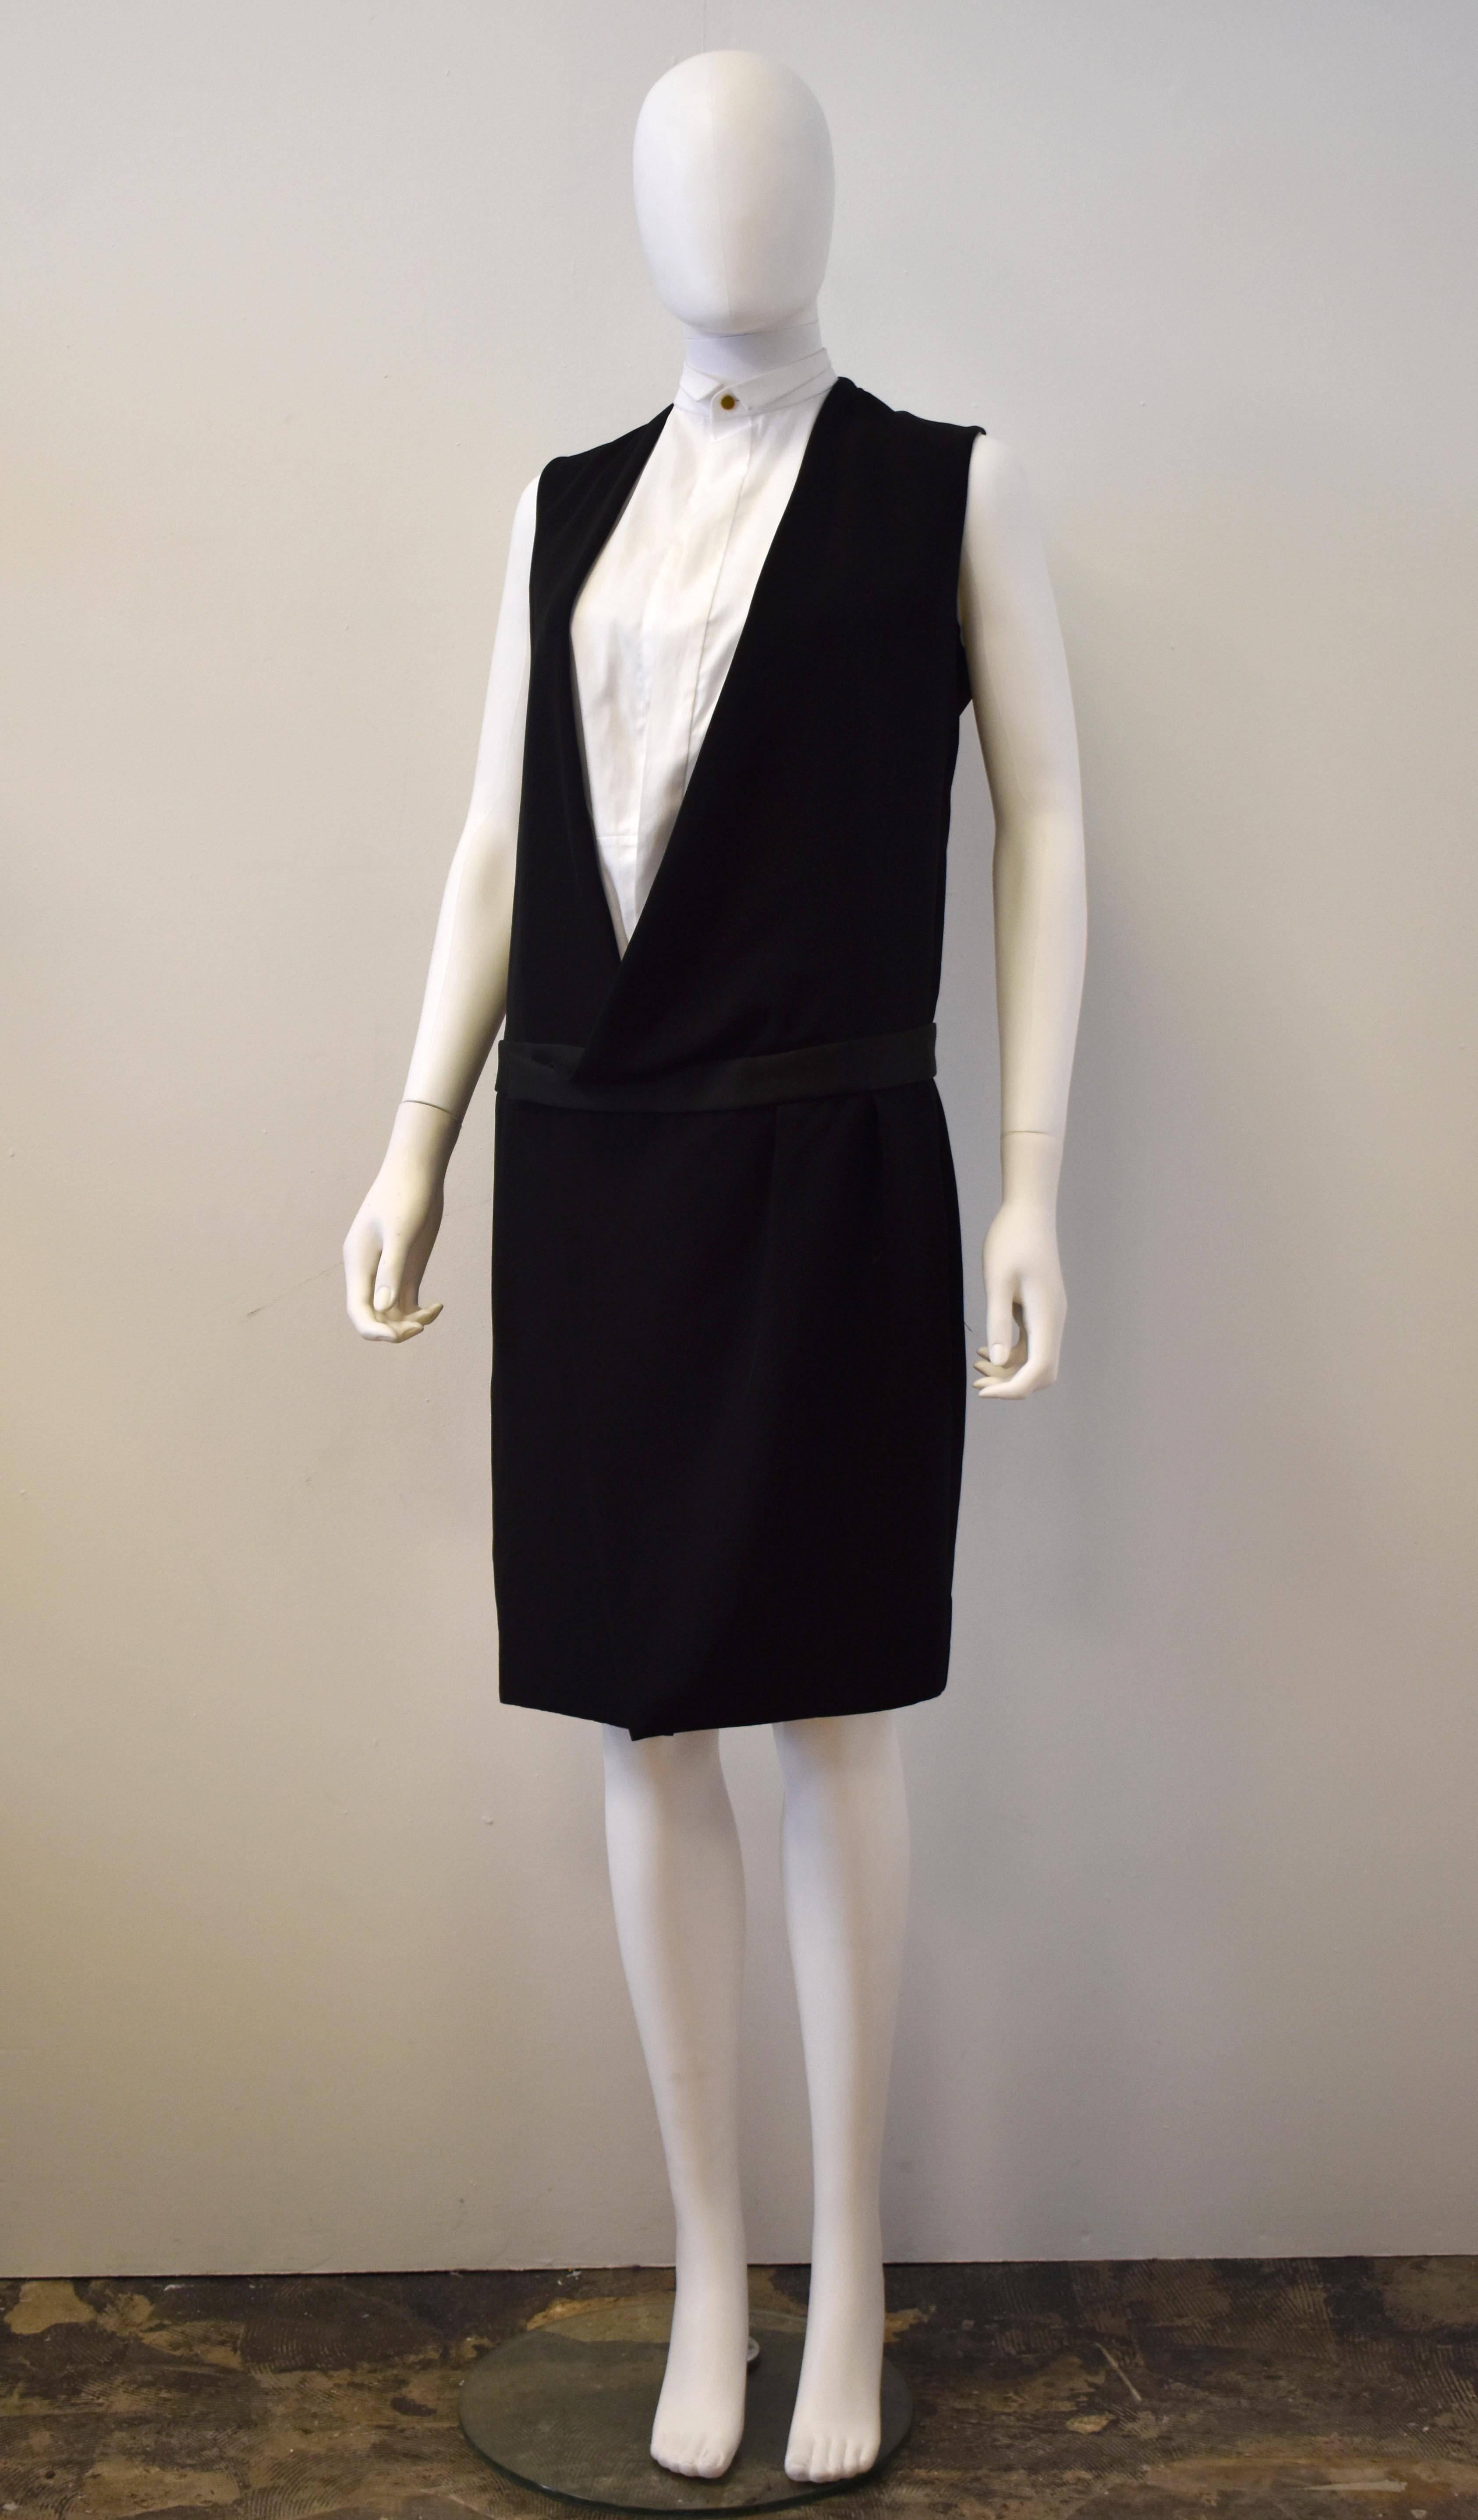 A beautiful and unworn black sleeveless tuxedo long coat with silk waistband and attached white sleeveless shirt inside. There is a single button and hook fastening at the hip, and darts along the front to create shape. Brand new without tags. The